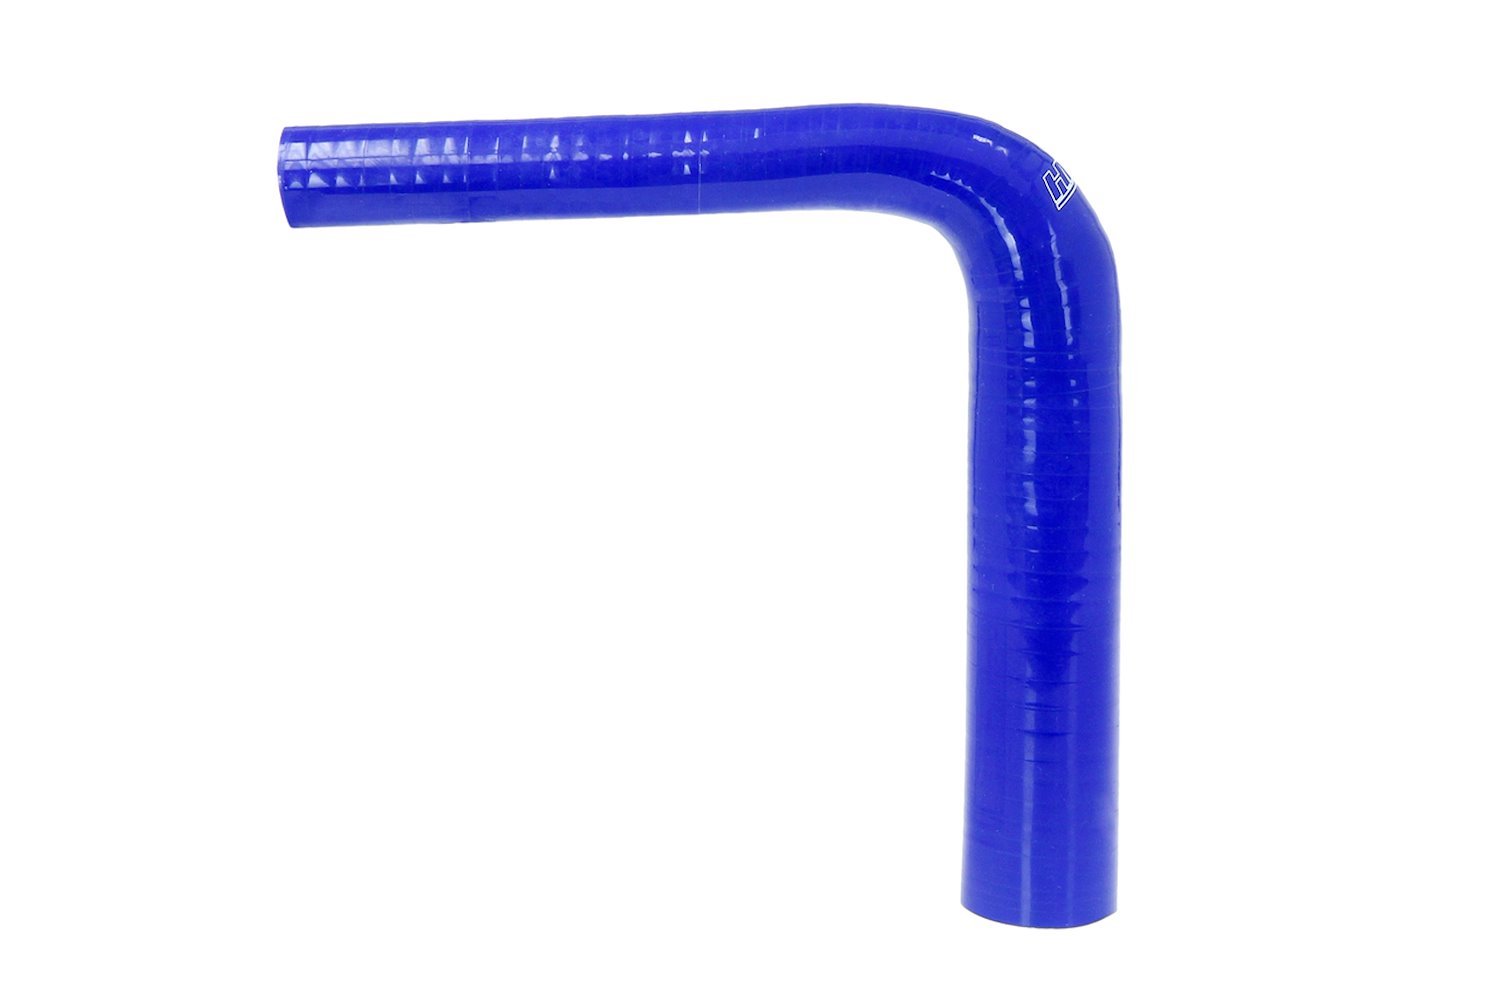 HTSER90-187-212-BLUE Silicone 90-Degree Elbow Hose, High-Temp 4-Ply Reinforced, 1-7/8 in. - 2-1/8 in. ID, Blue